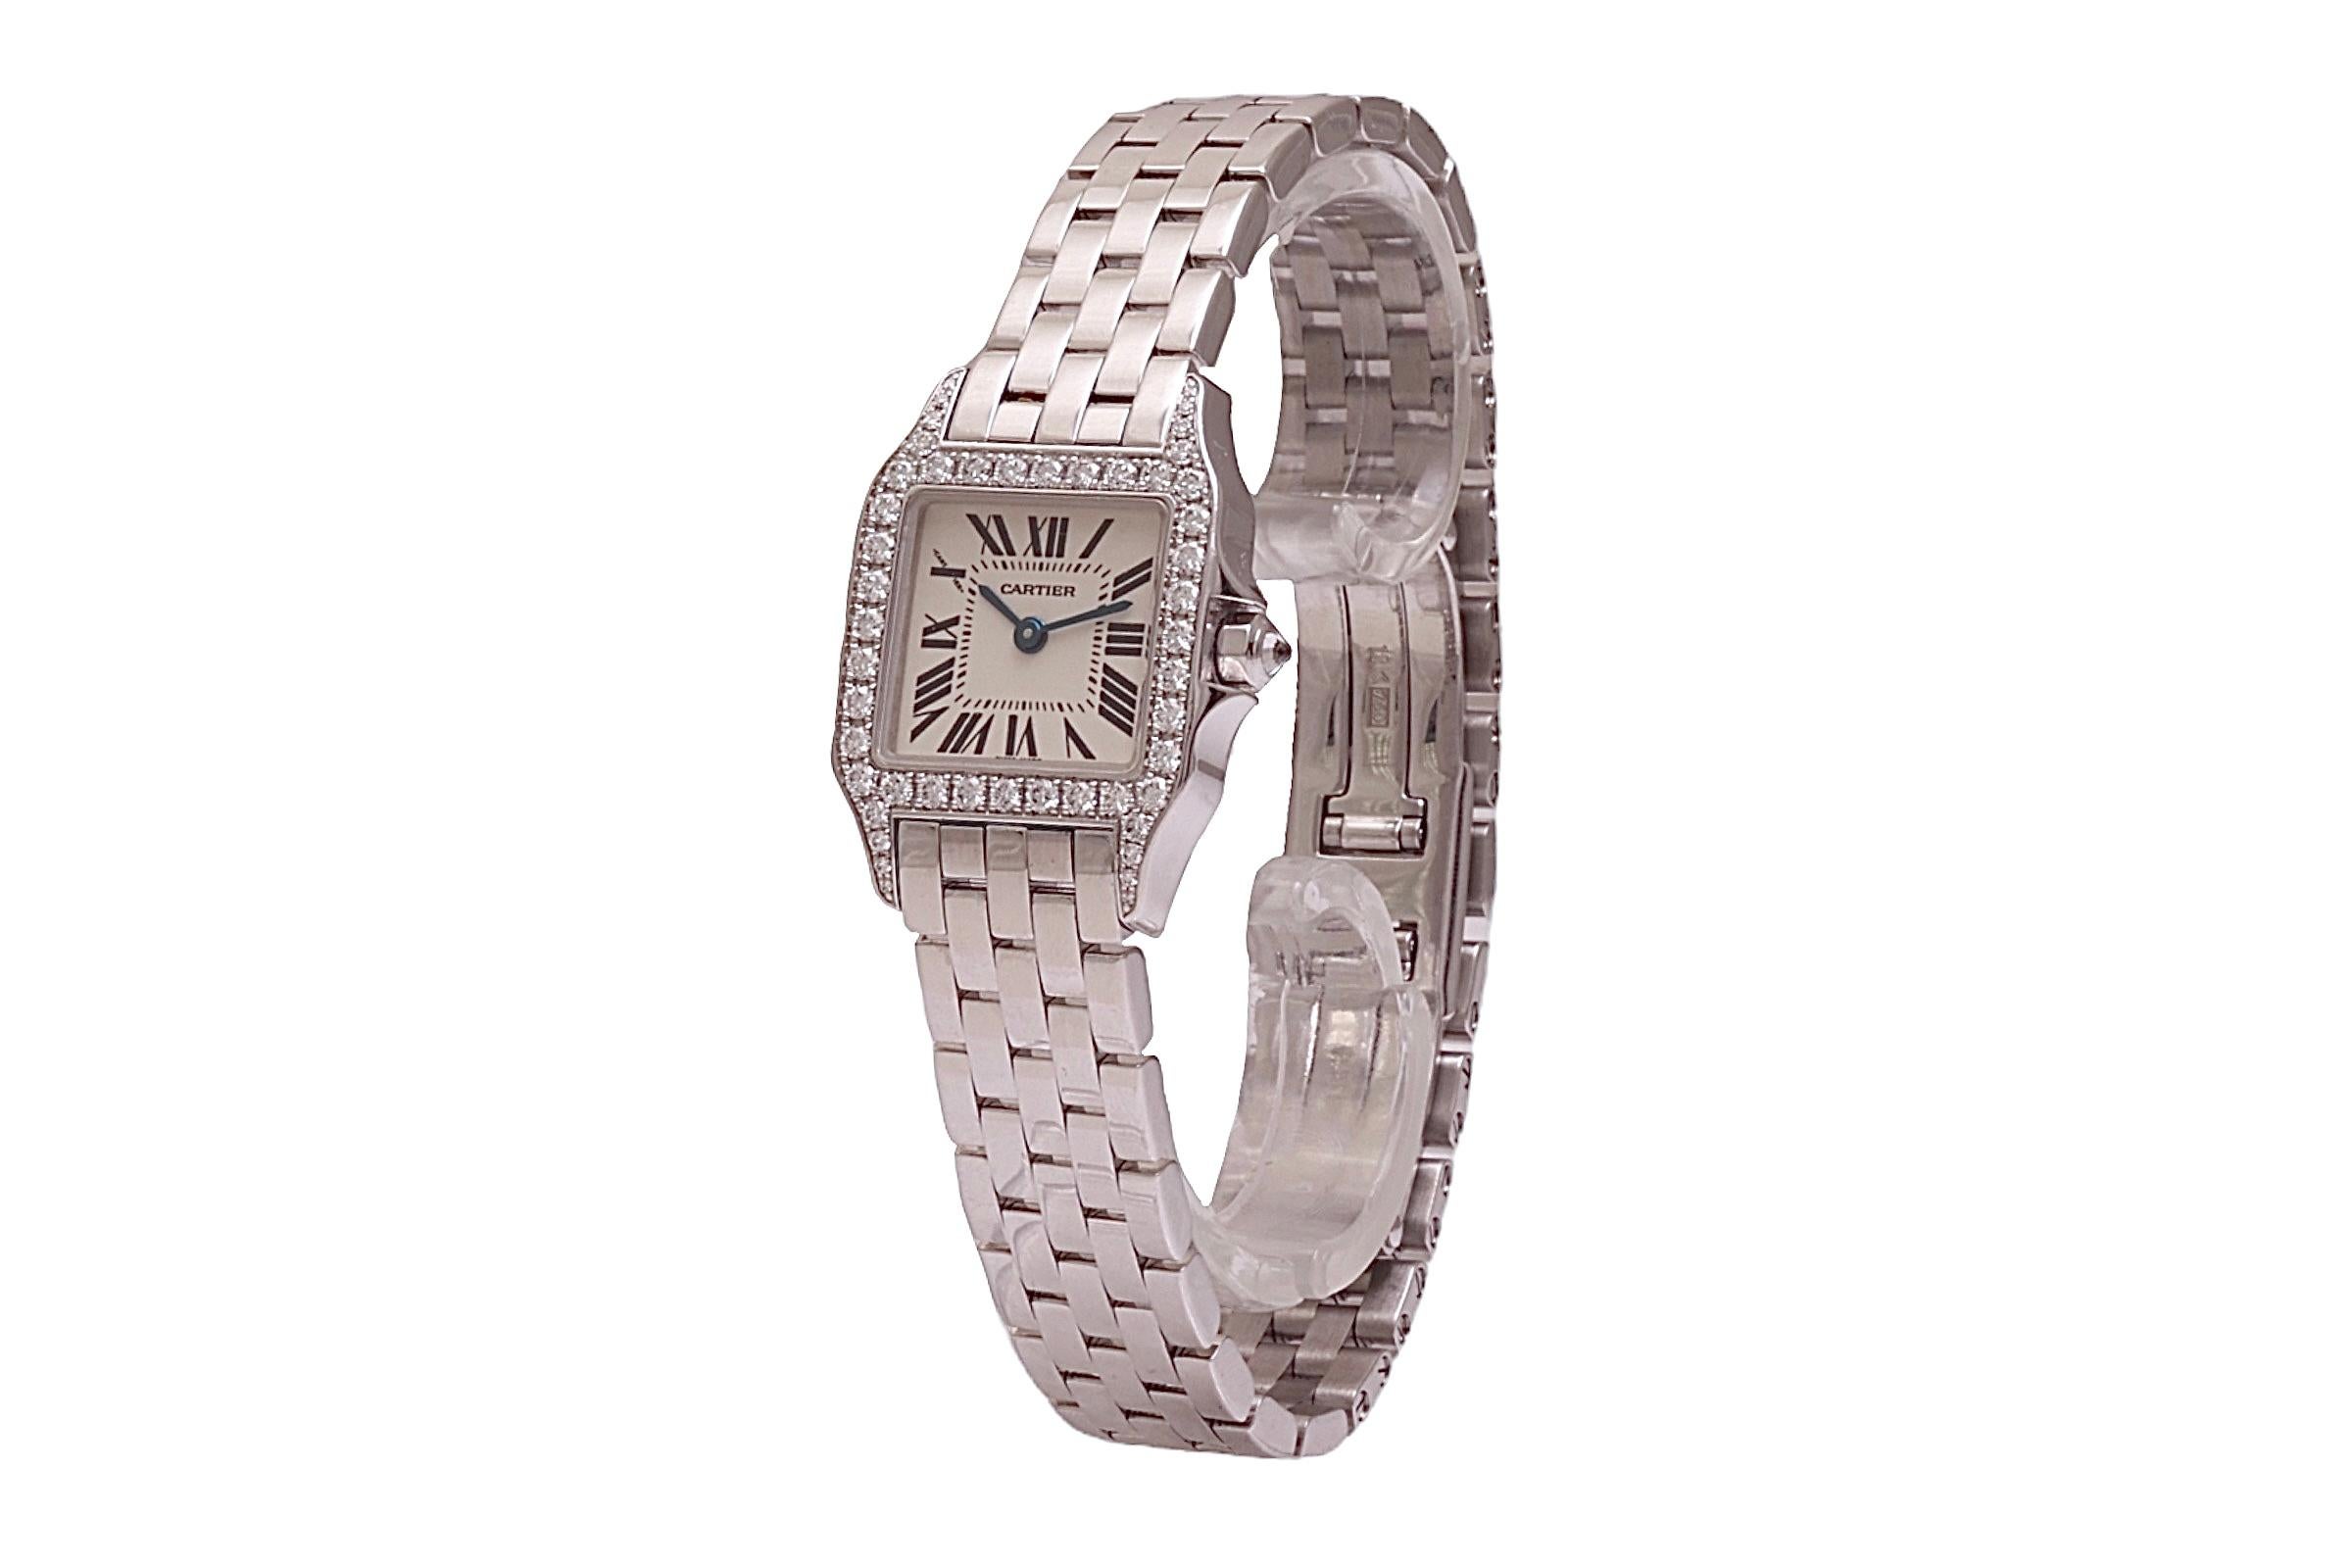 18 kt. White Gold Cartier Santos Demoiselle Ladies Wristwatch With Box and Papers in Top Condition

Watch comes with Cartier box and papers

Model: Santos Demoiselle

Movement: Quartz

Case: 18 kt. white gold Square Case 20 mm x 20 mm, Bezel set